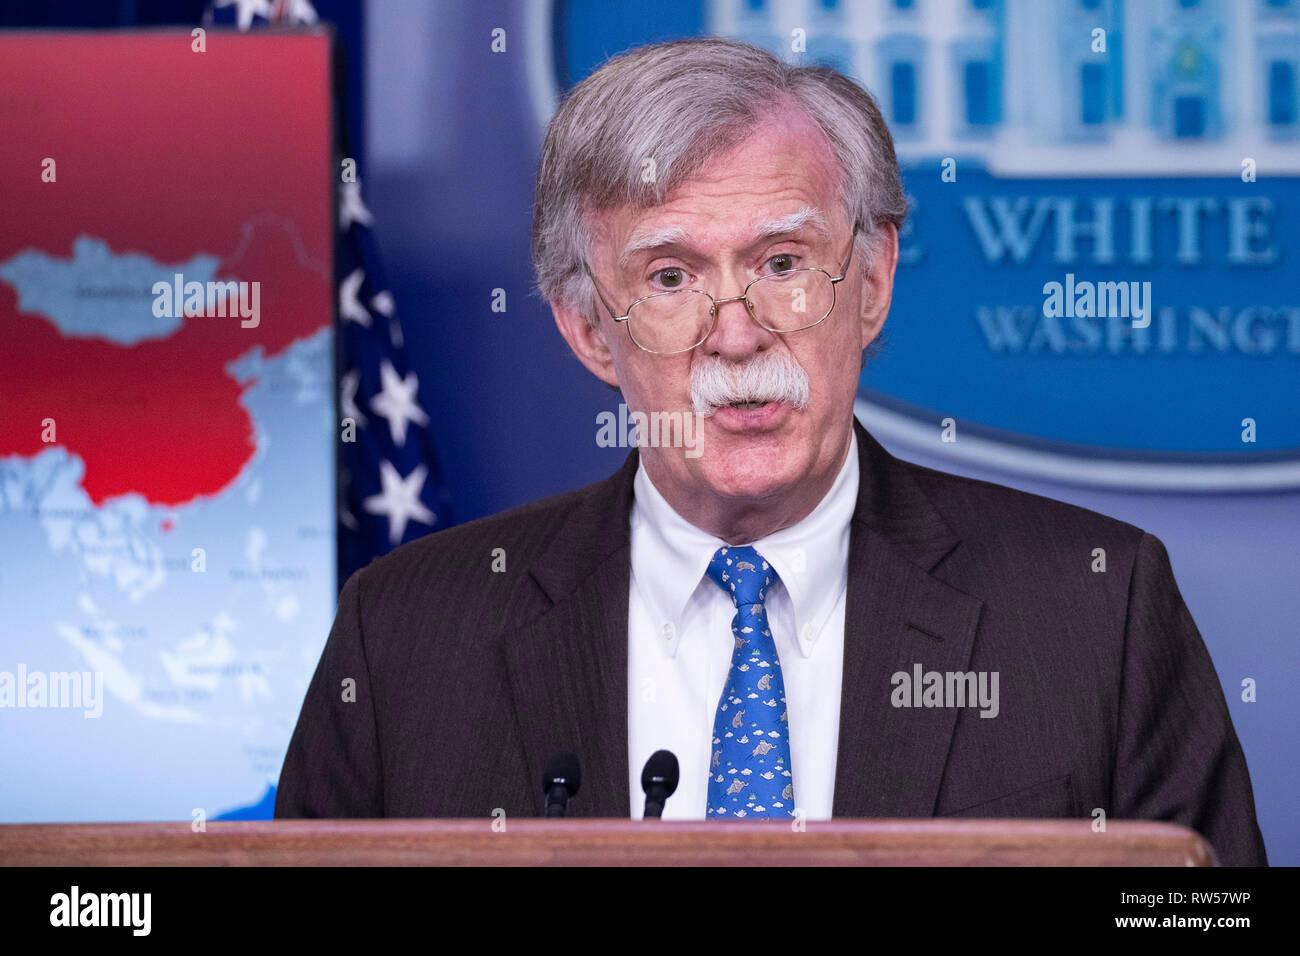 National Security Advisor John Bolton takes questions from reporters at the White House in Washington, DC on January 28, 2019. The White House has announced new economic sanctions against Venezuela. Stock Photo